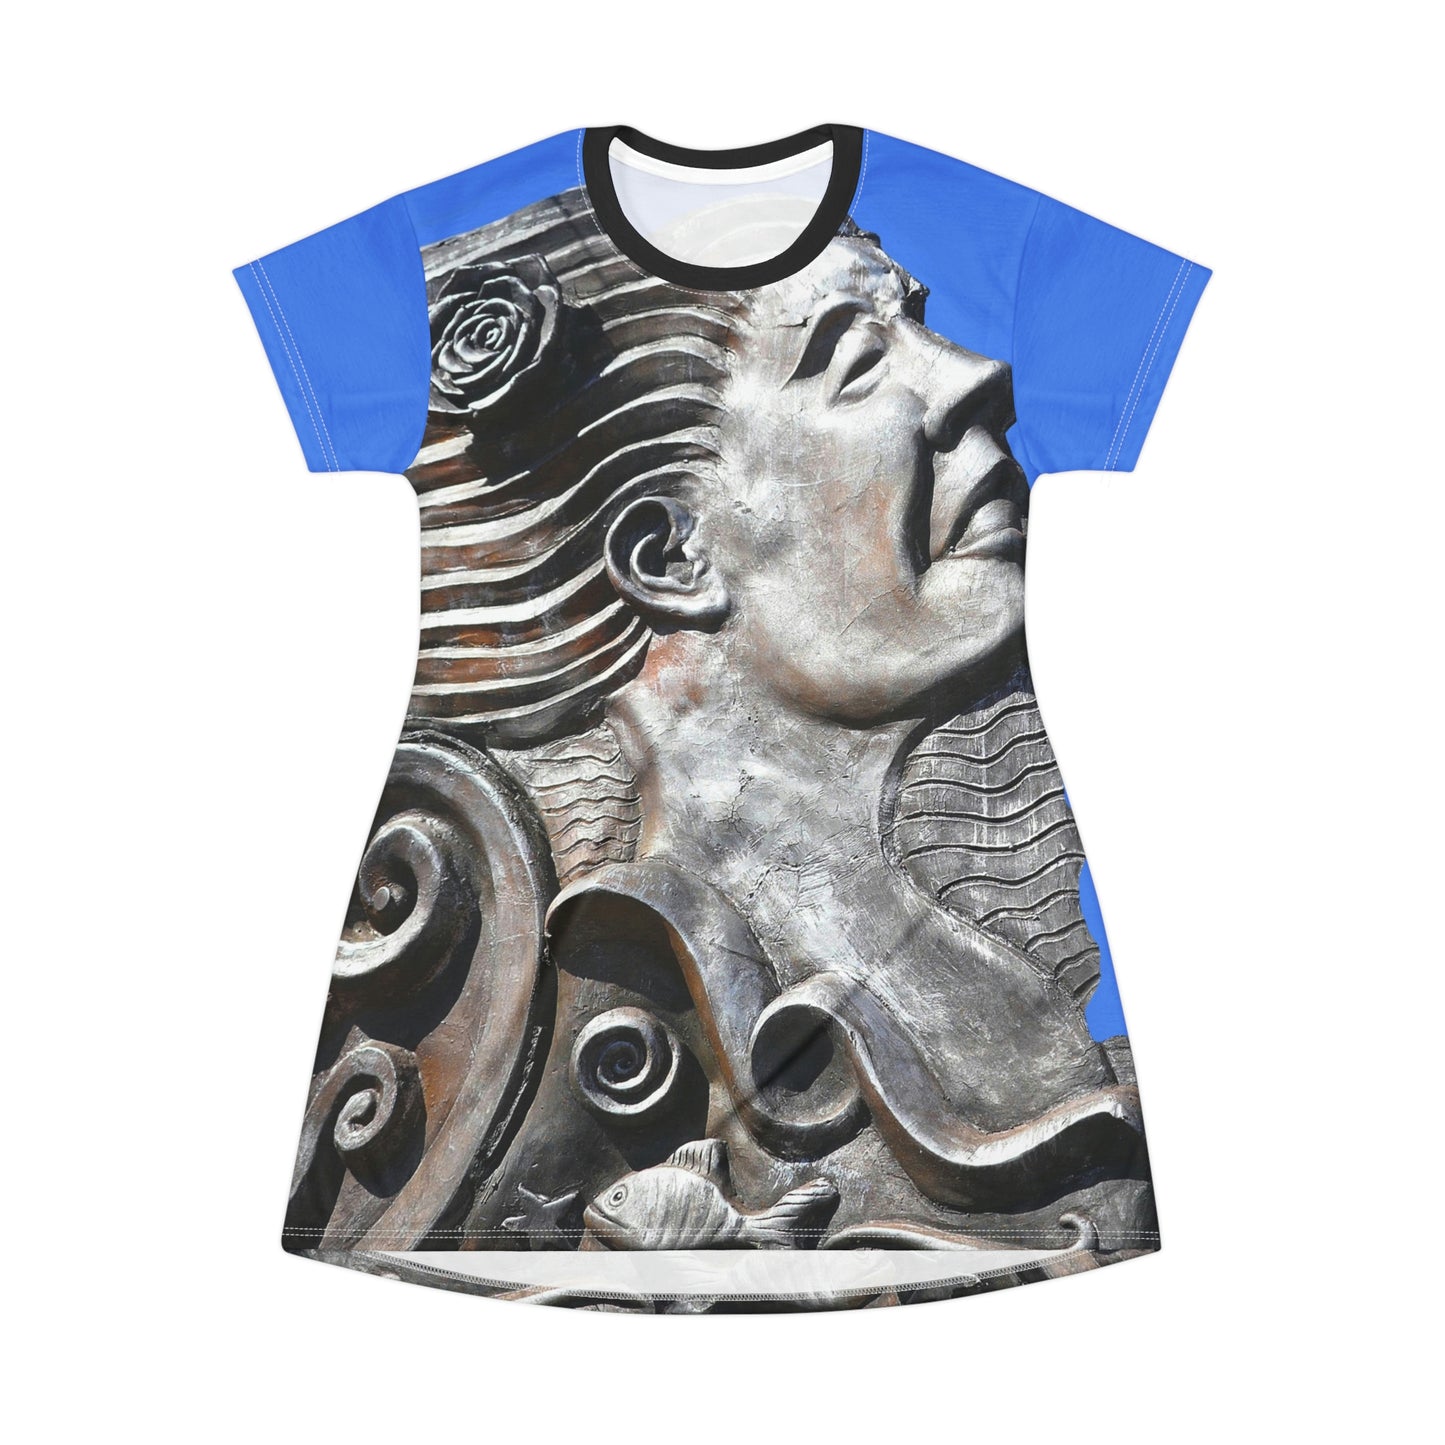 Nymph Beauty - Women's All-Over Print T-Shirt Dress - Fry1Productions